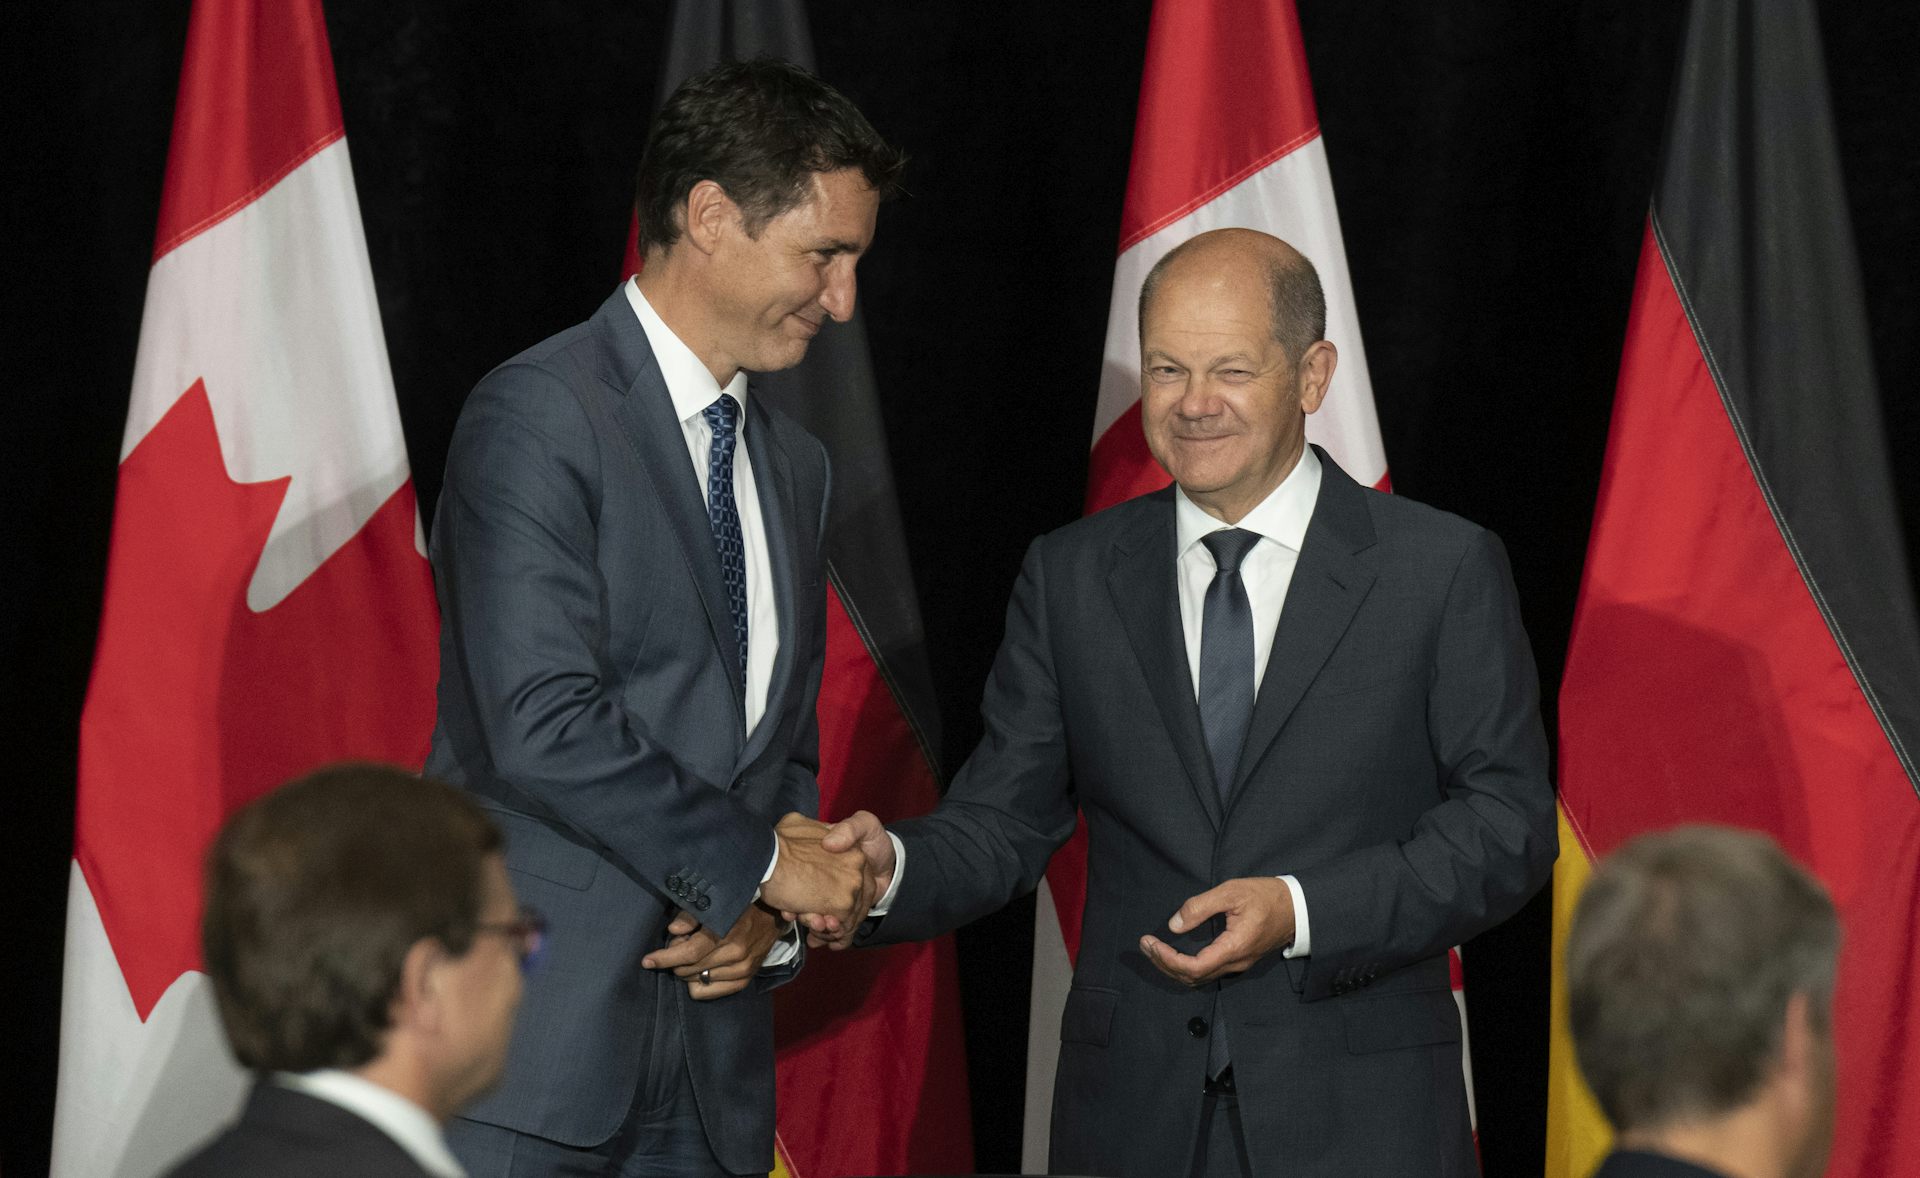 Canadian Prime Minister Justin Trudeau and German Chancellor Olaf Scholz signed a deal on Aug. 23, 2022, to kickstart a transatlantic hydrogen supply chain, with the first deliveries expected in just three years. THE CANADIAN PRESS/Adrian Wyld